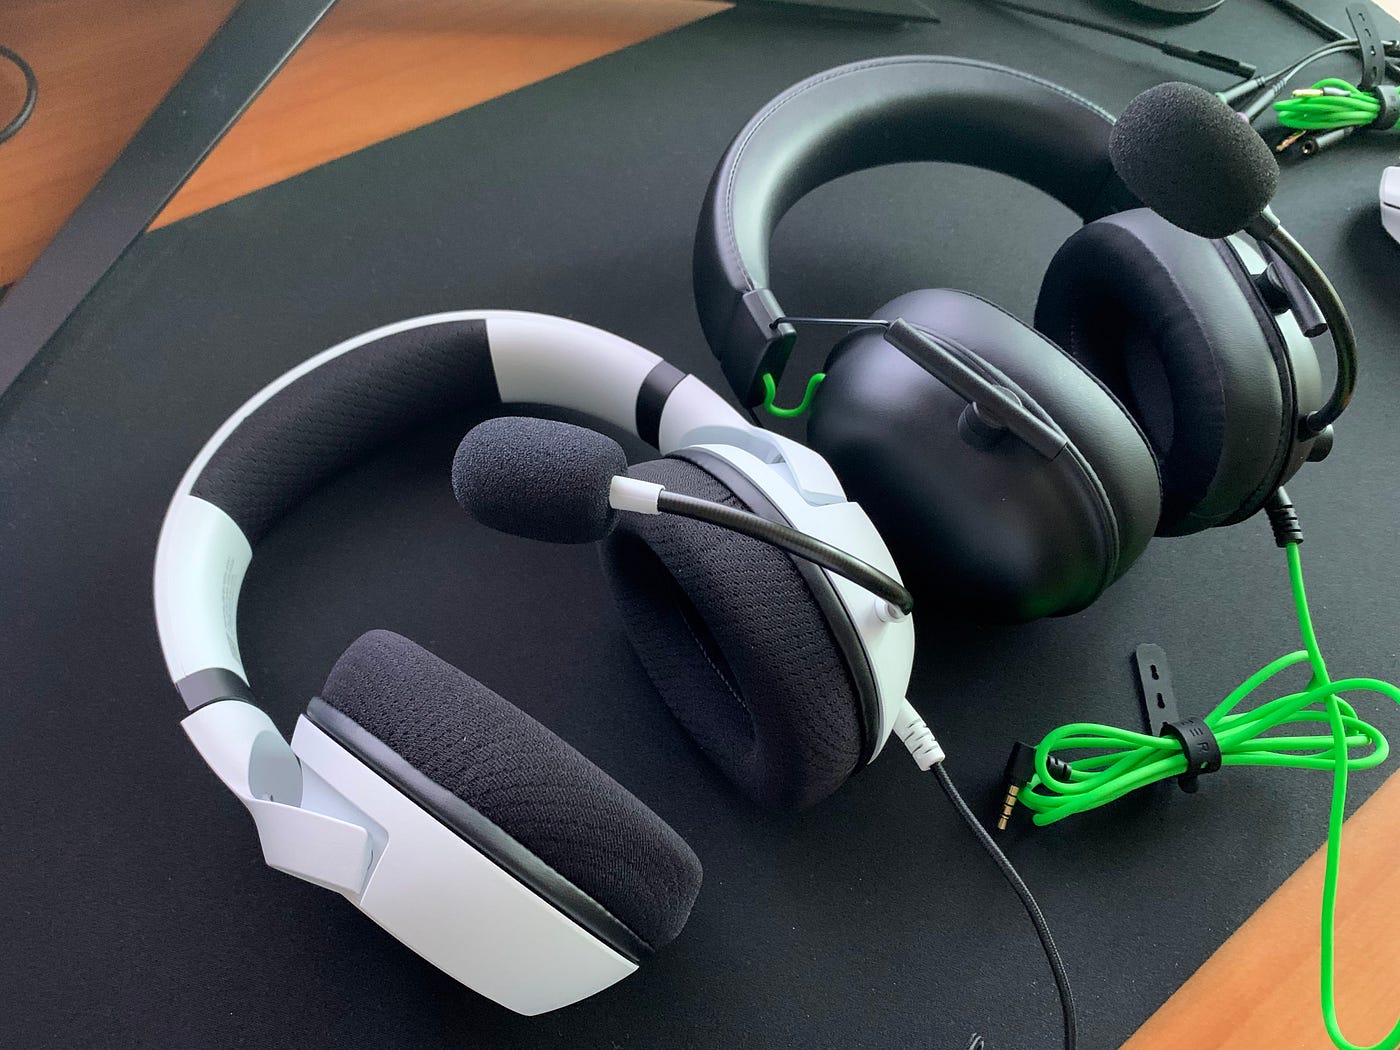 I've got an old razer kraken headset, put don't have the connecting cable  which I'm told you have to use to get the mic and audio to work. I only  have one